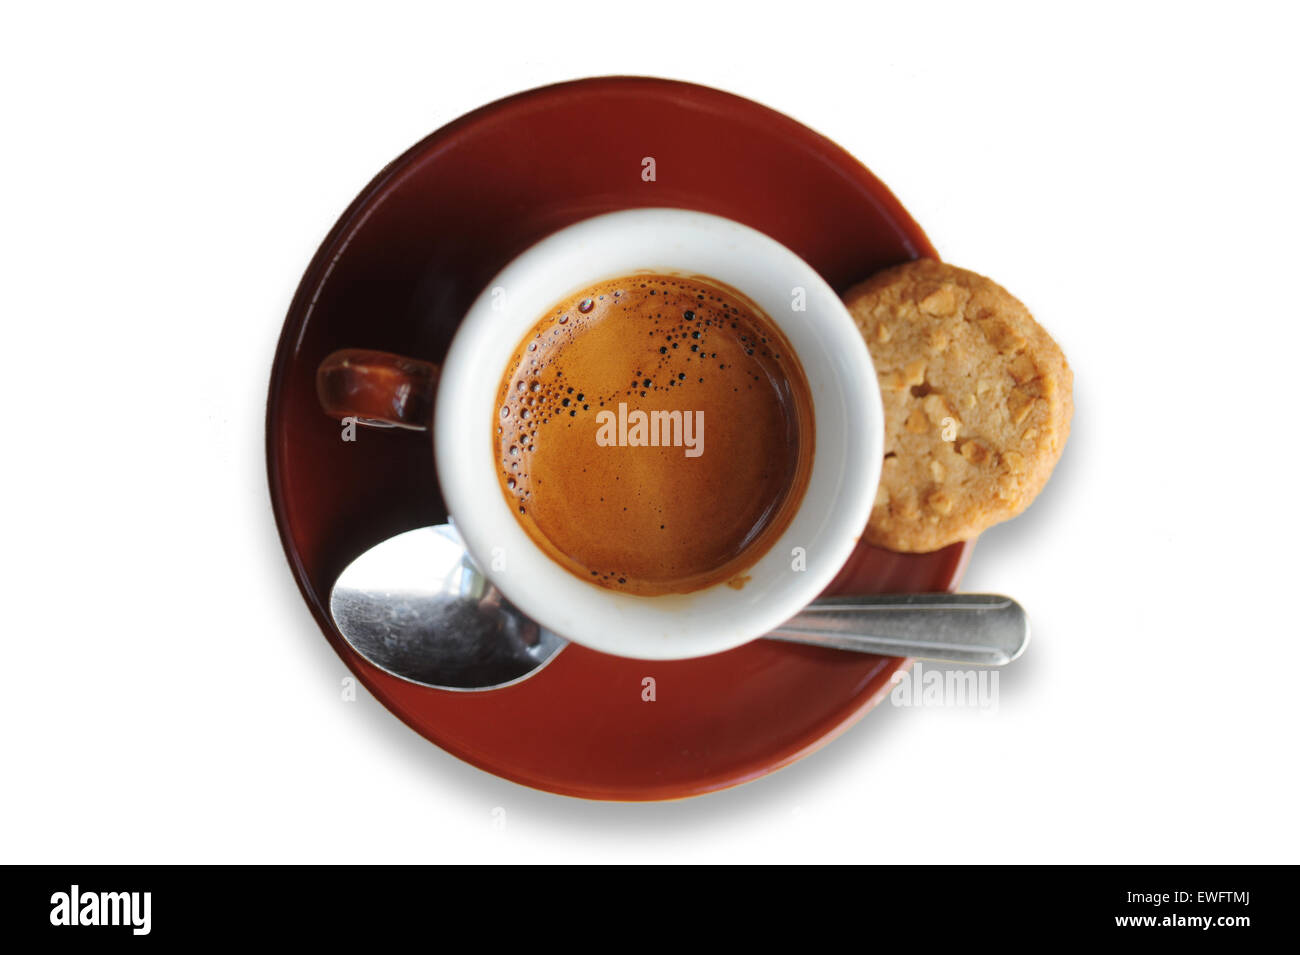 Food Coffee Cafe Espresso beverage served in a demitasse ceramic cup on white cut out Stock Photo